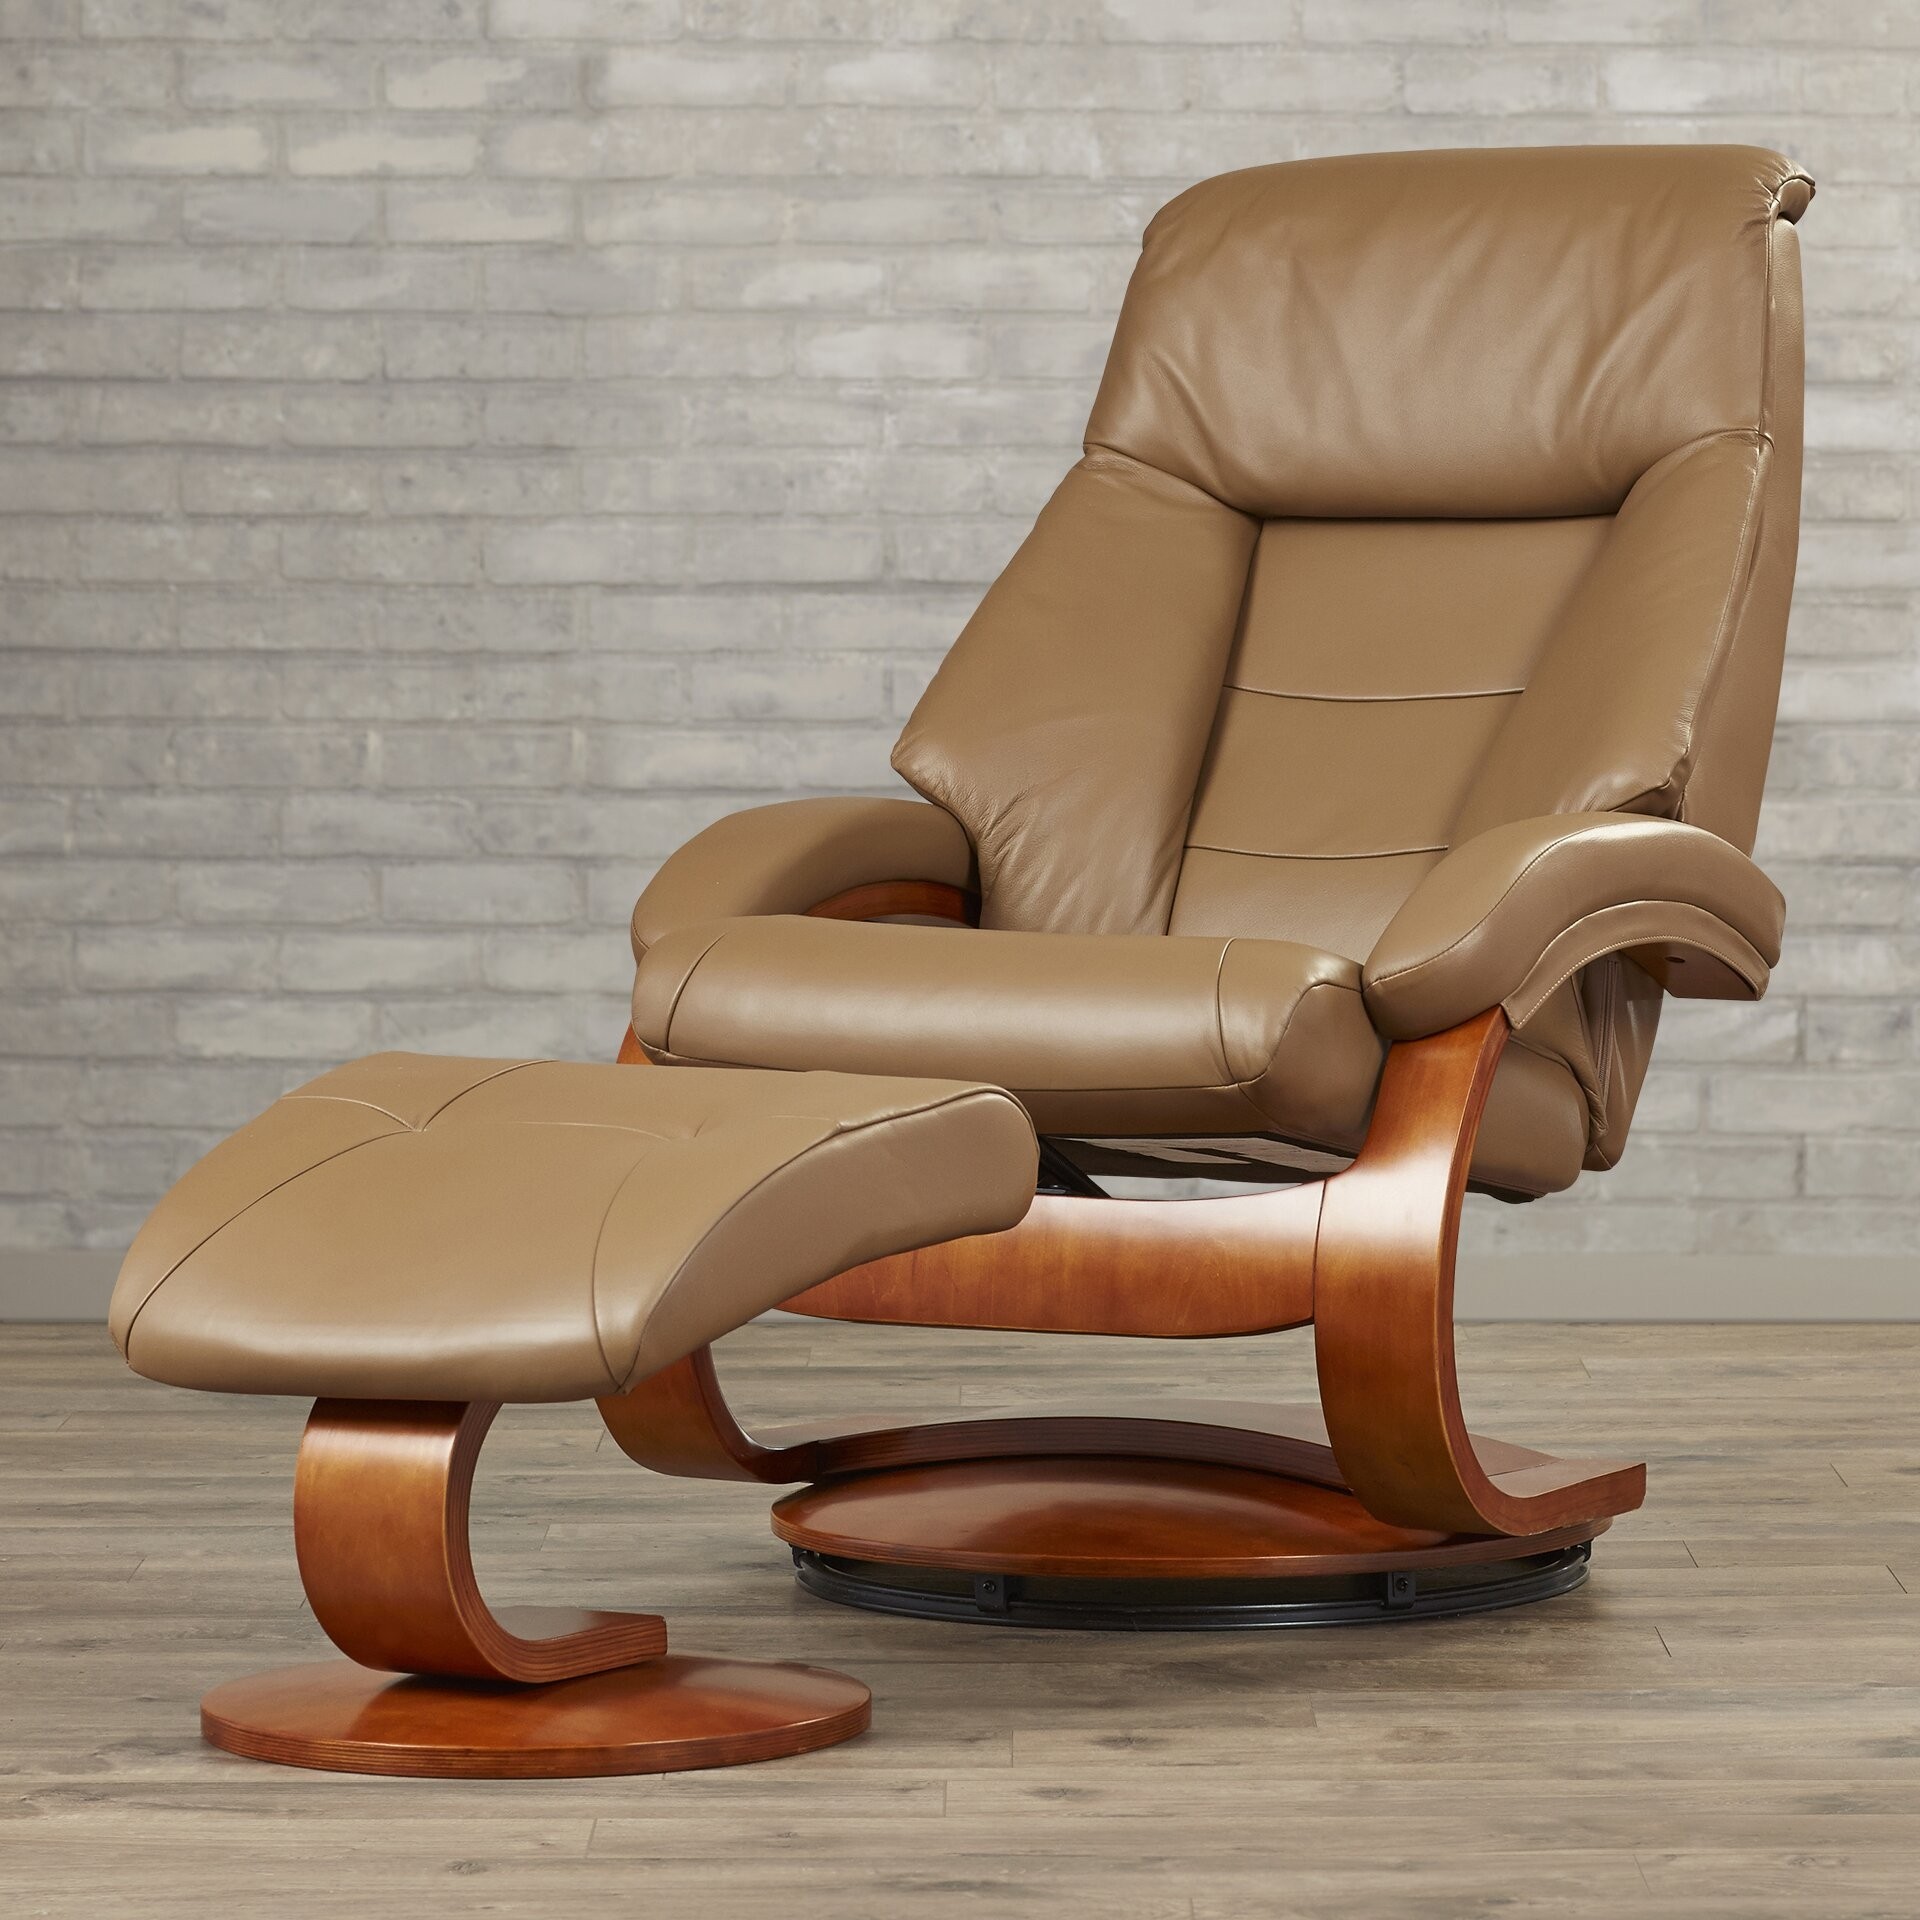 Sturdy Wooden Manual Swivel Recliner With Included Ottoman